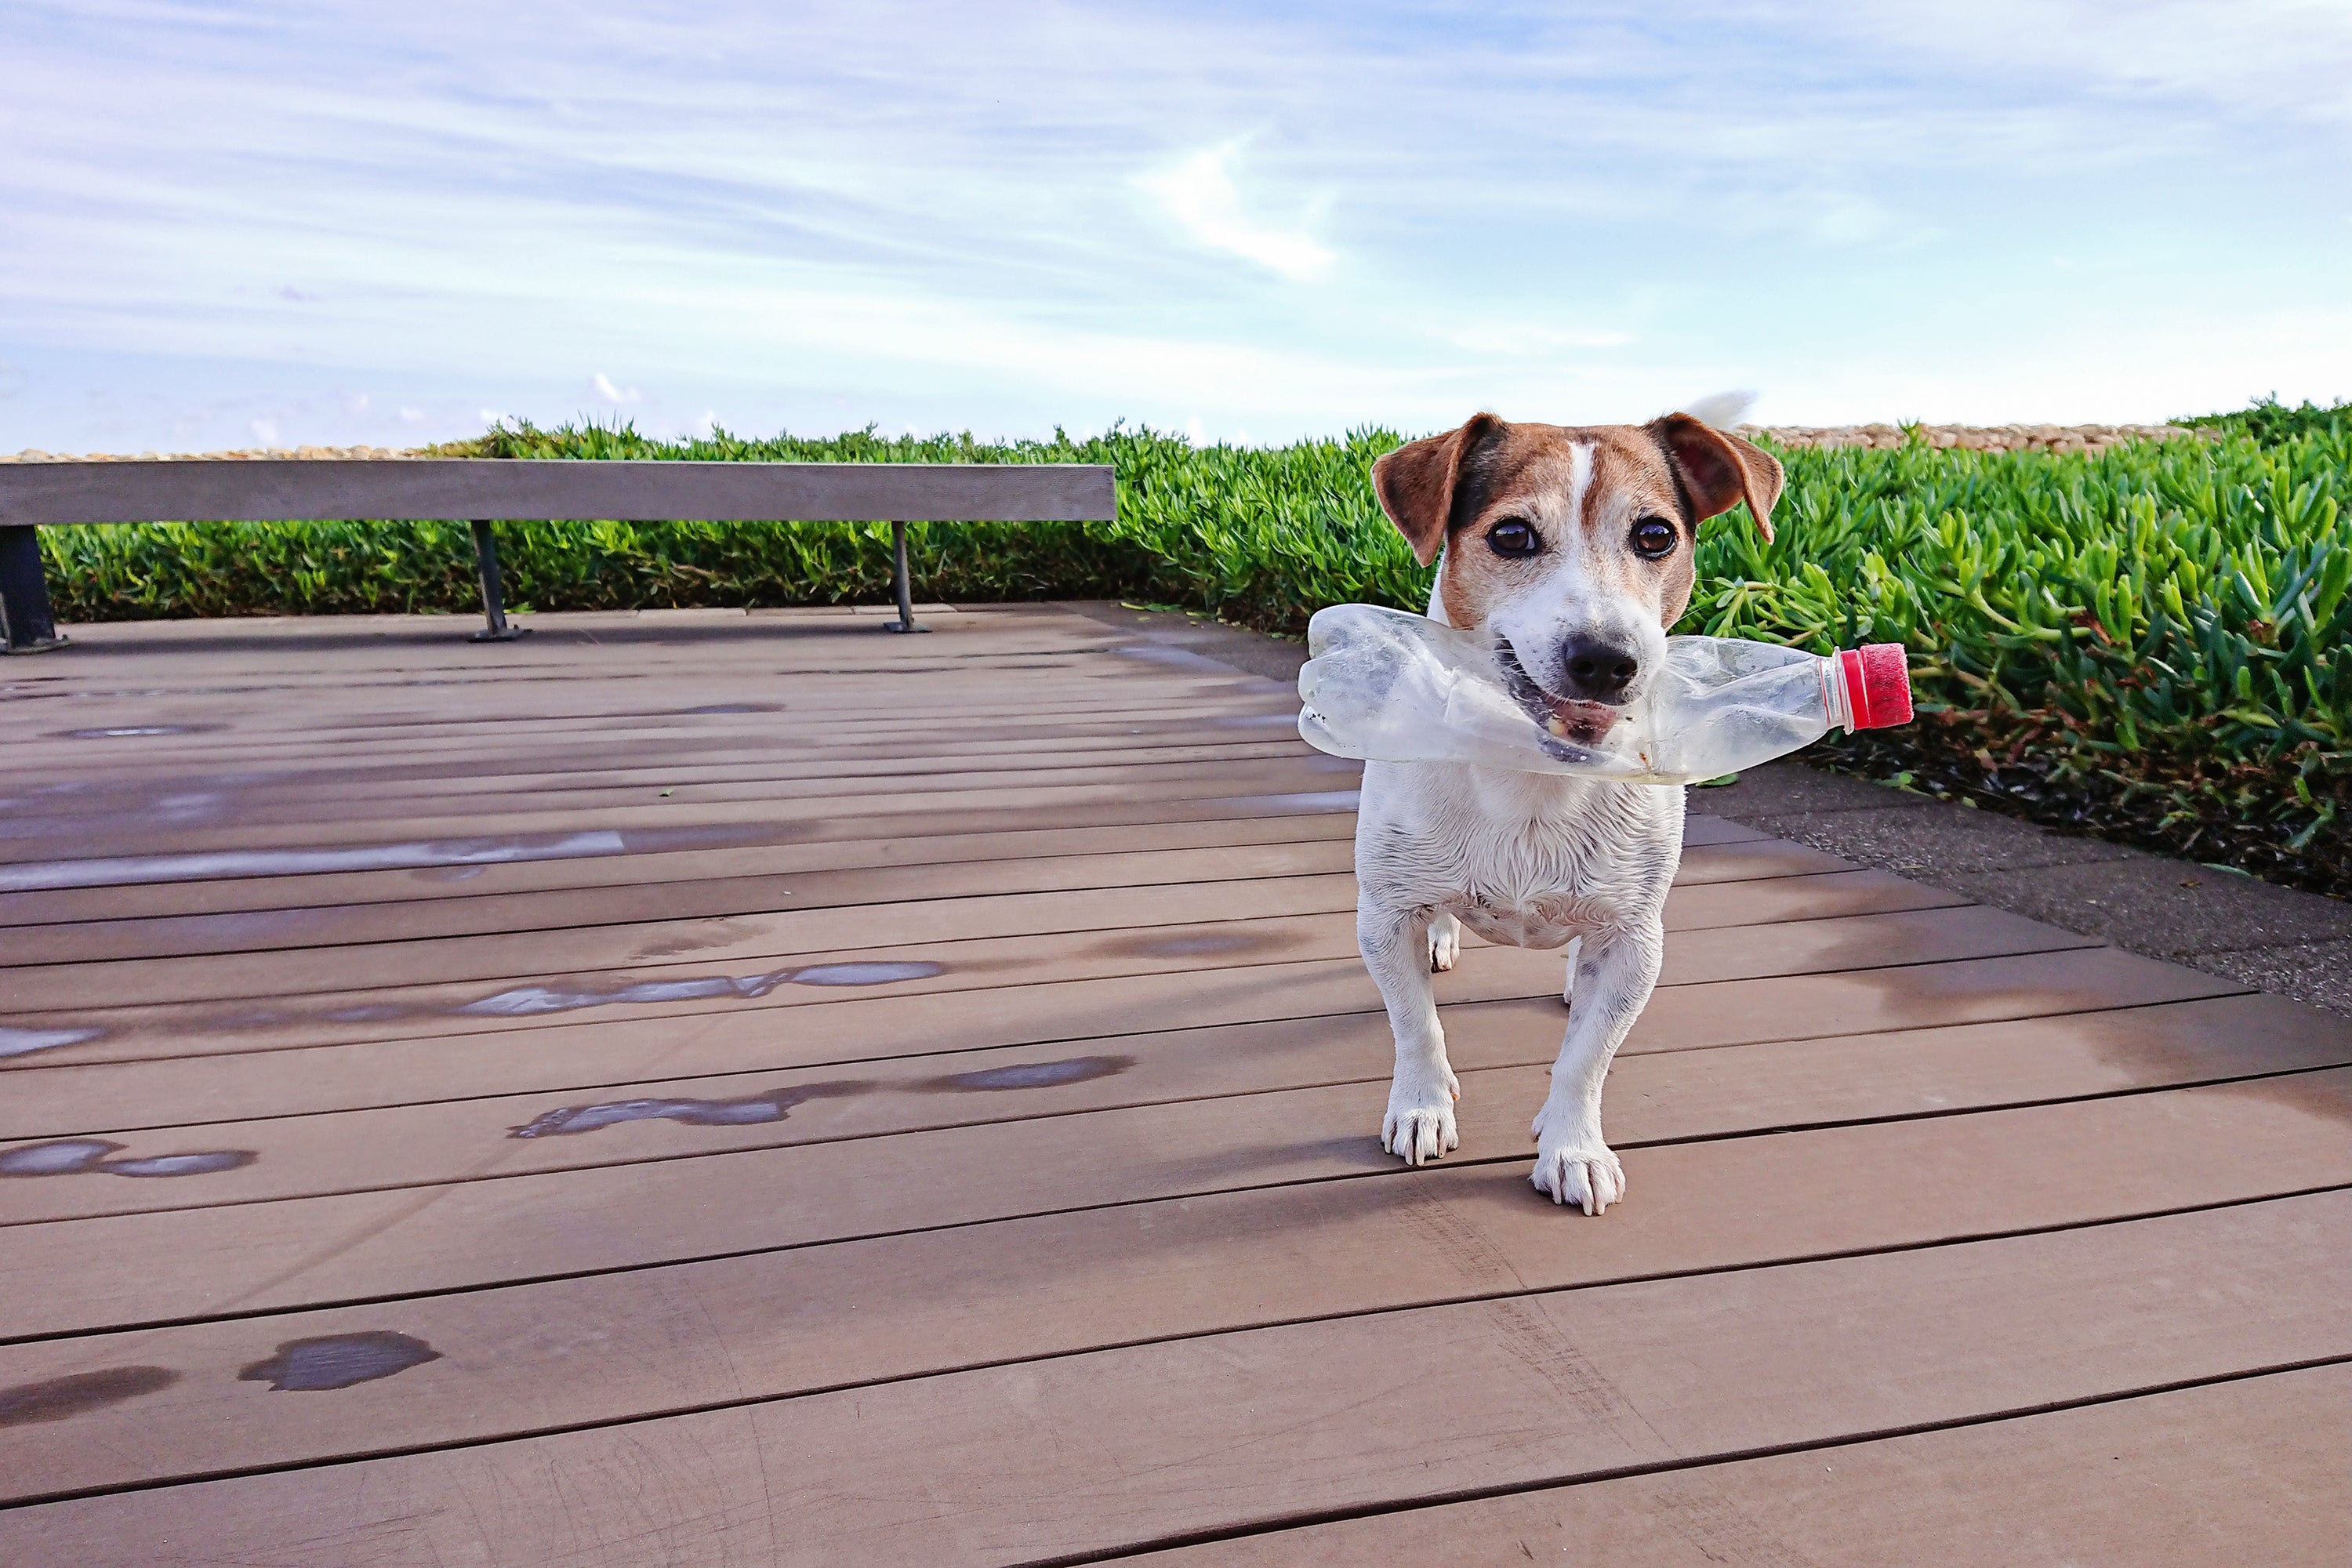 white jack Russell terrier holding plastic bottle in his mouth. Dog is standing on wooden dock, with bench and greenery in background.